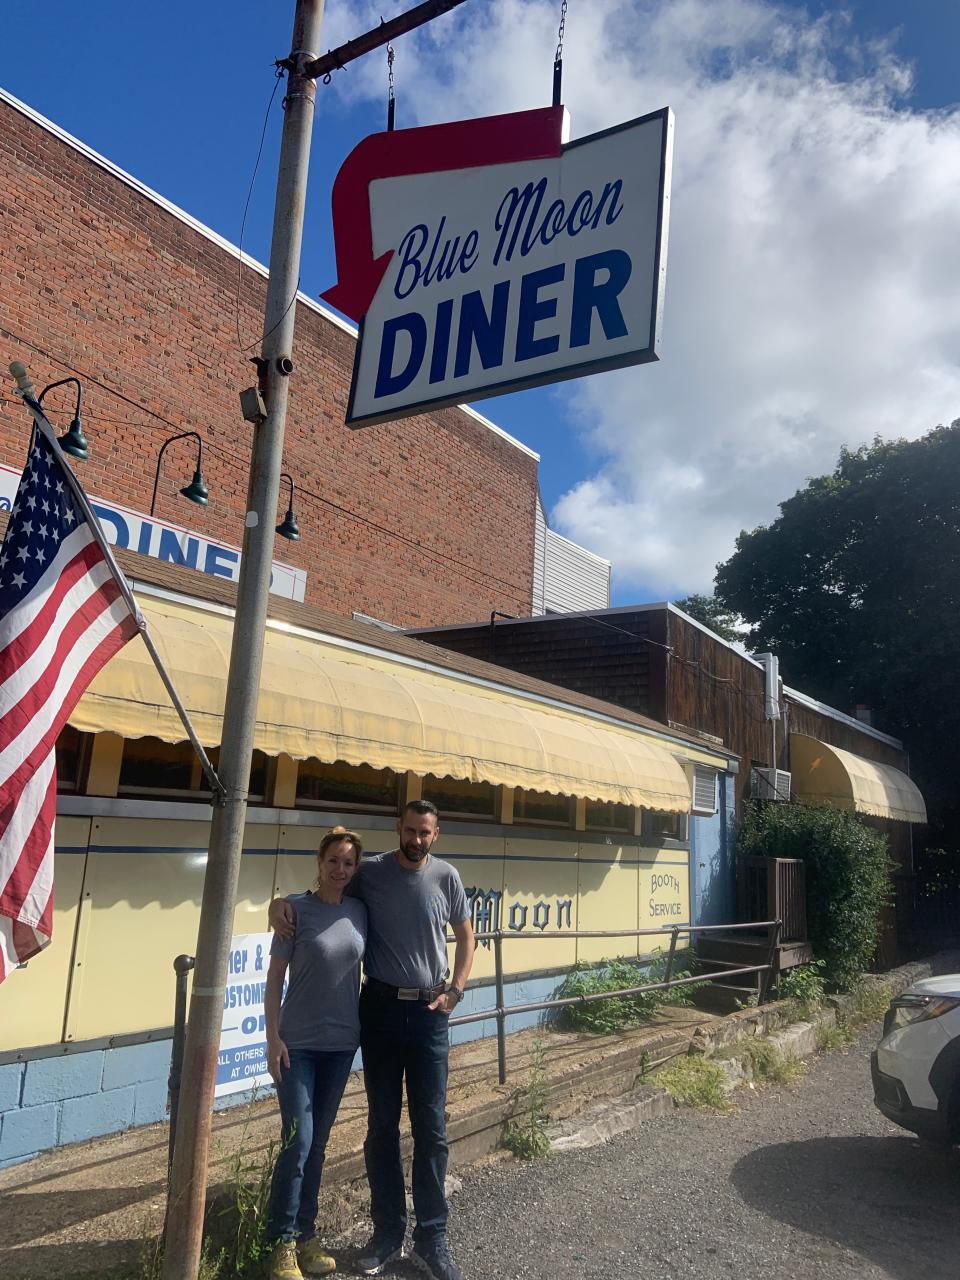 Robert and Kathleen Wright of Orange recently purchased the Blue Moon Diner in Gardner for $290,000.